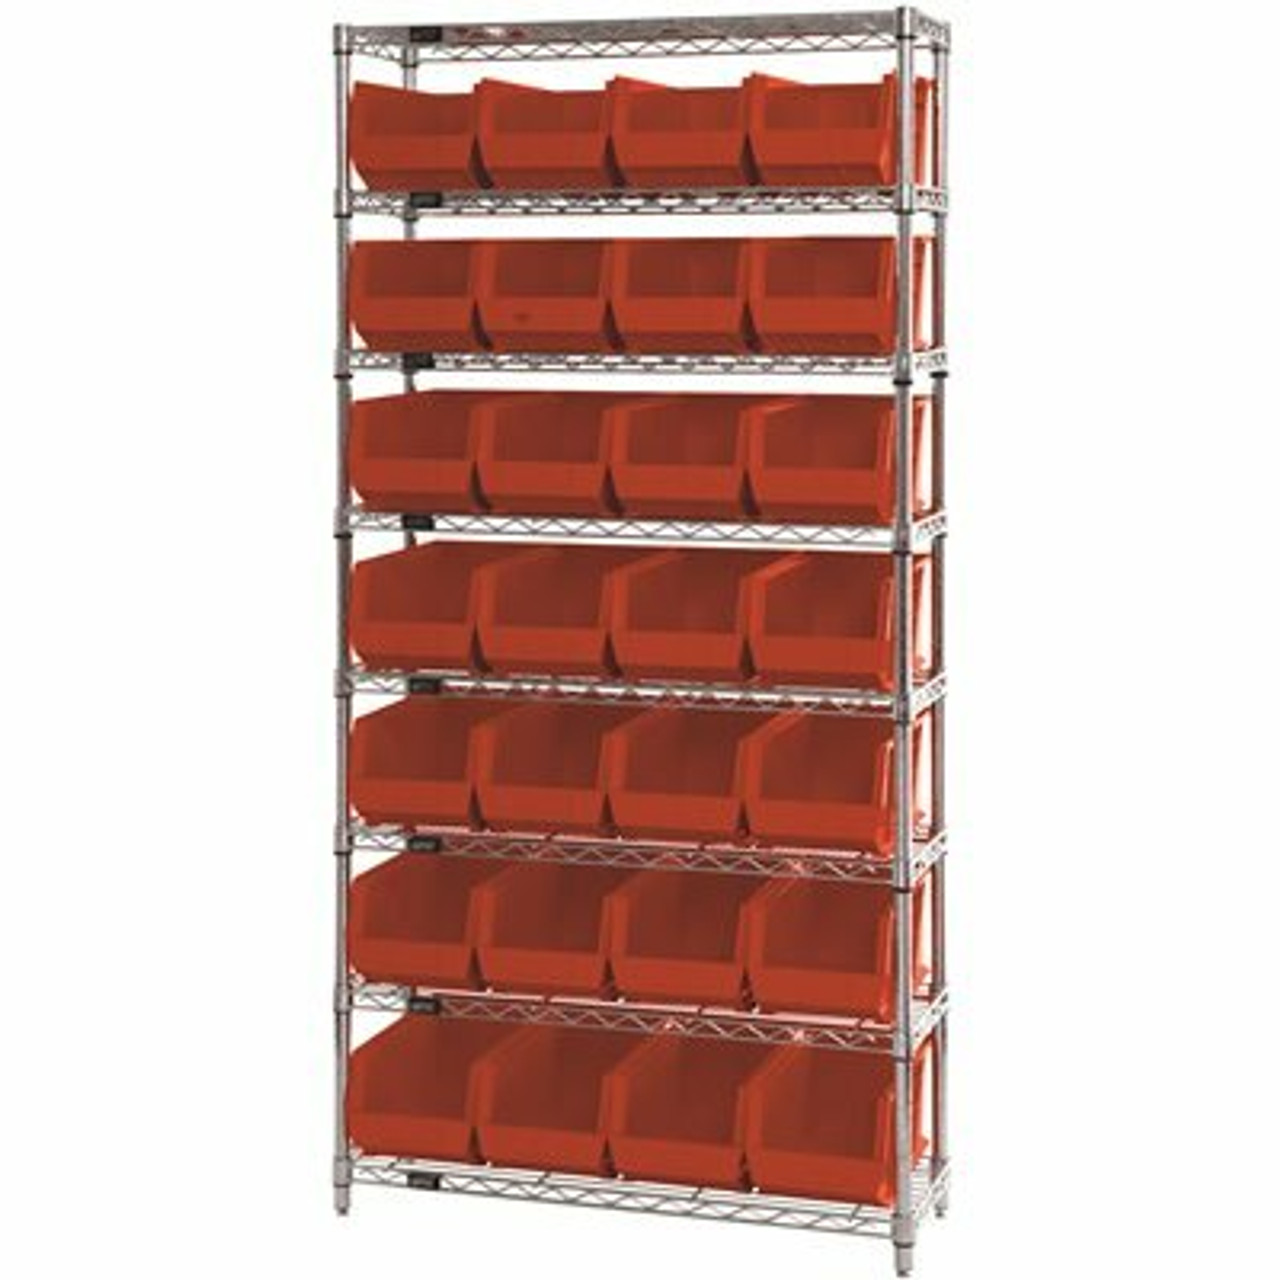 Quantum Storage Systems Giant Open Hopper 36 In. X 14 In. X 74 In. Wire Chrome Heavy Duty 8-Tier Industrial Shelving Unit - 308241548